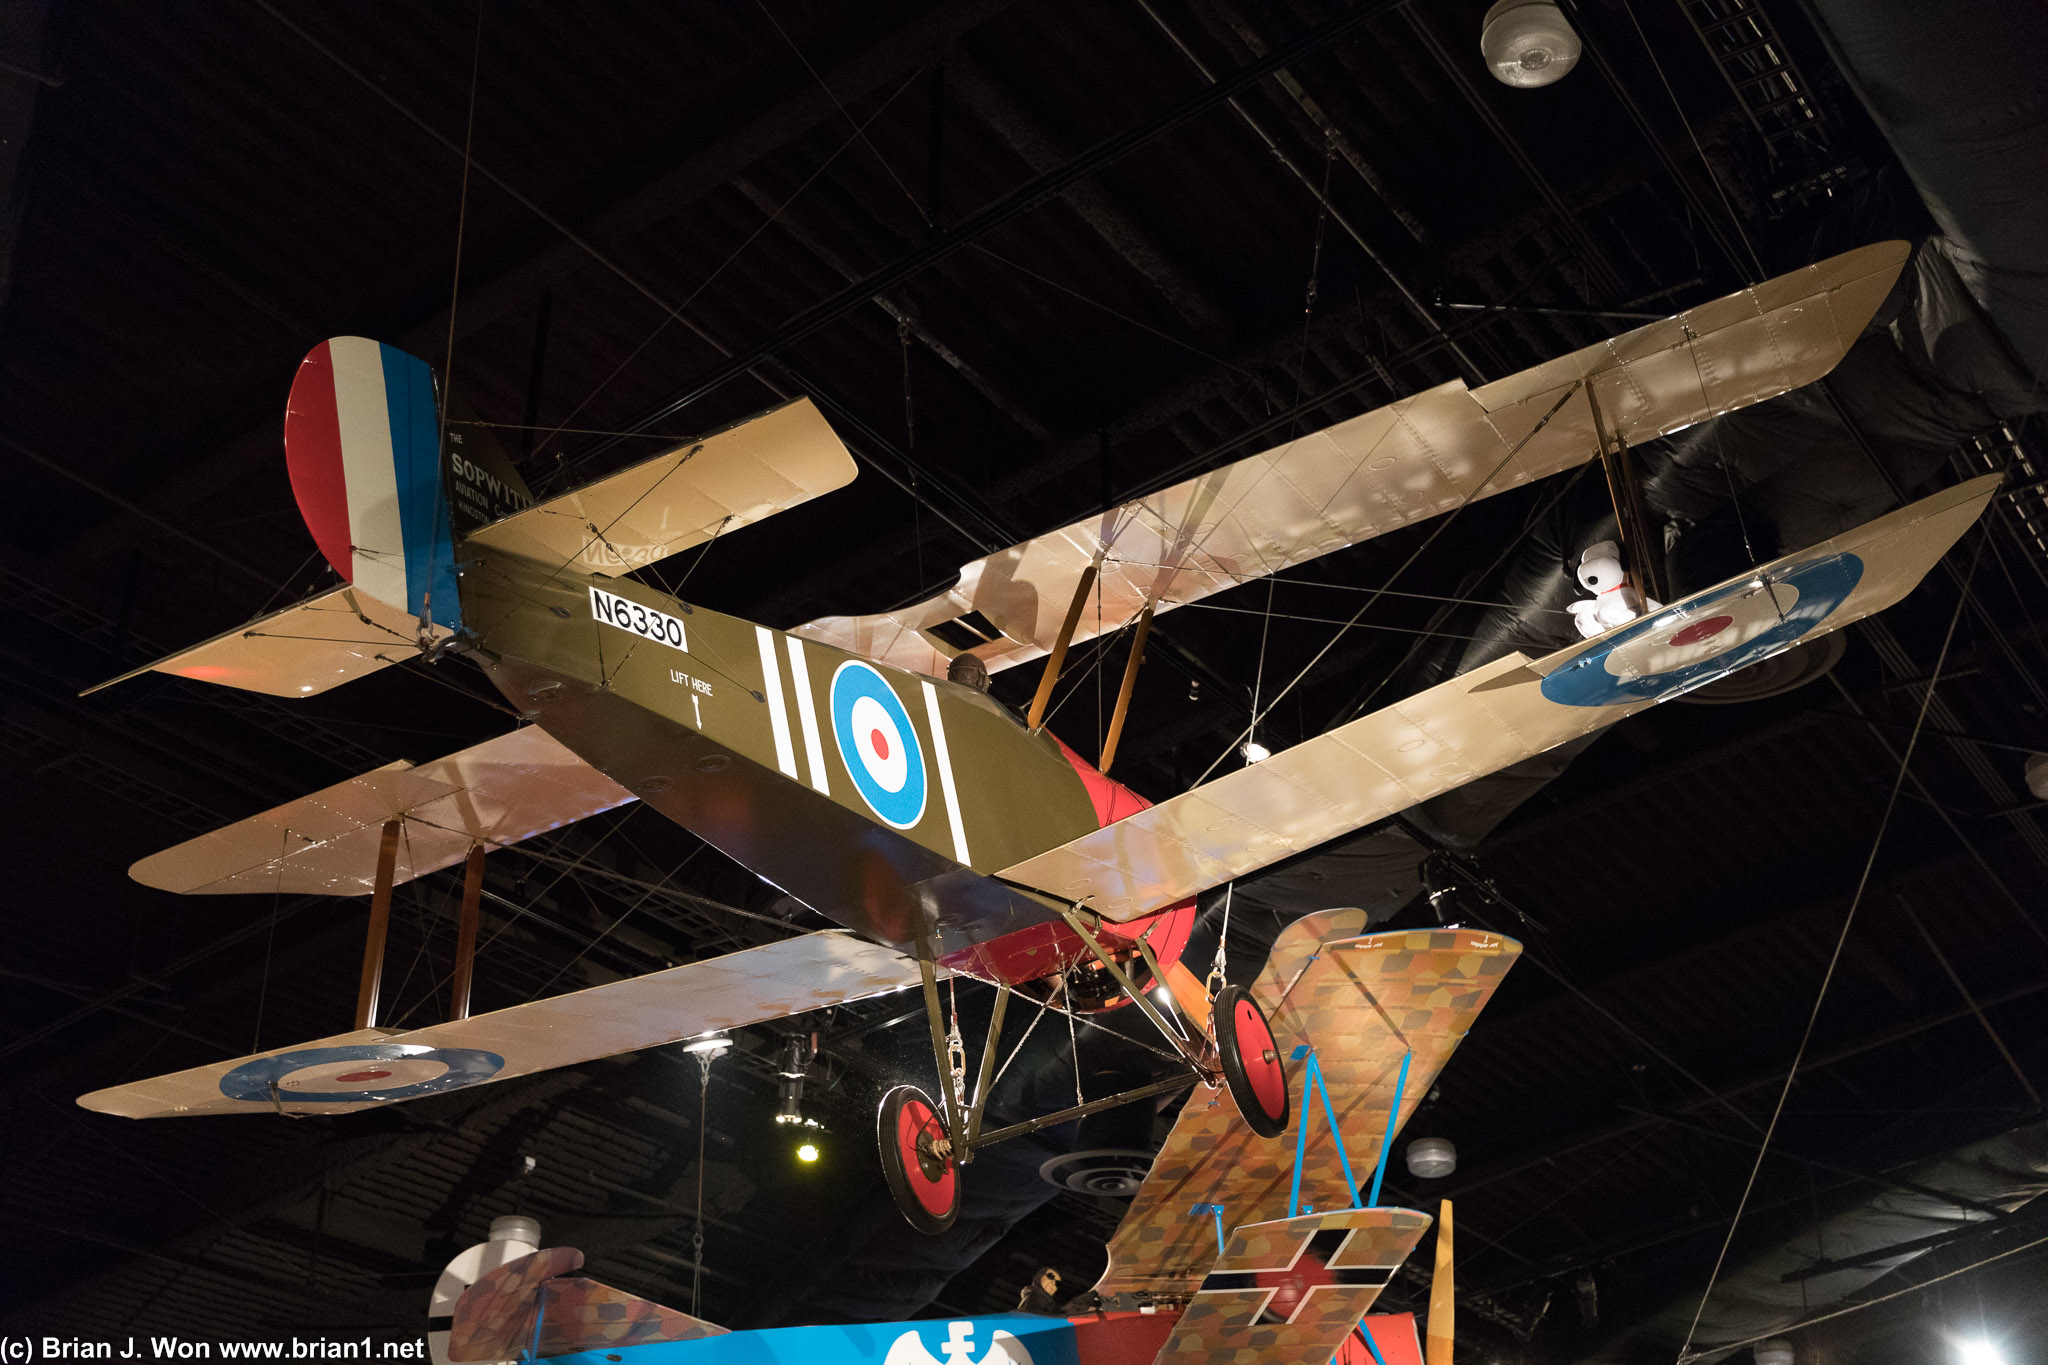 Sopwith Camel, complete with Snoopy!